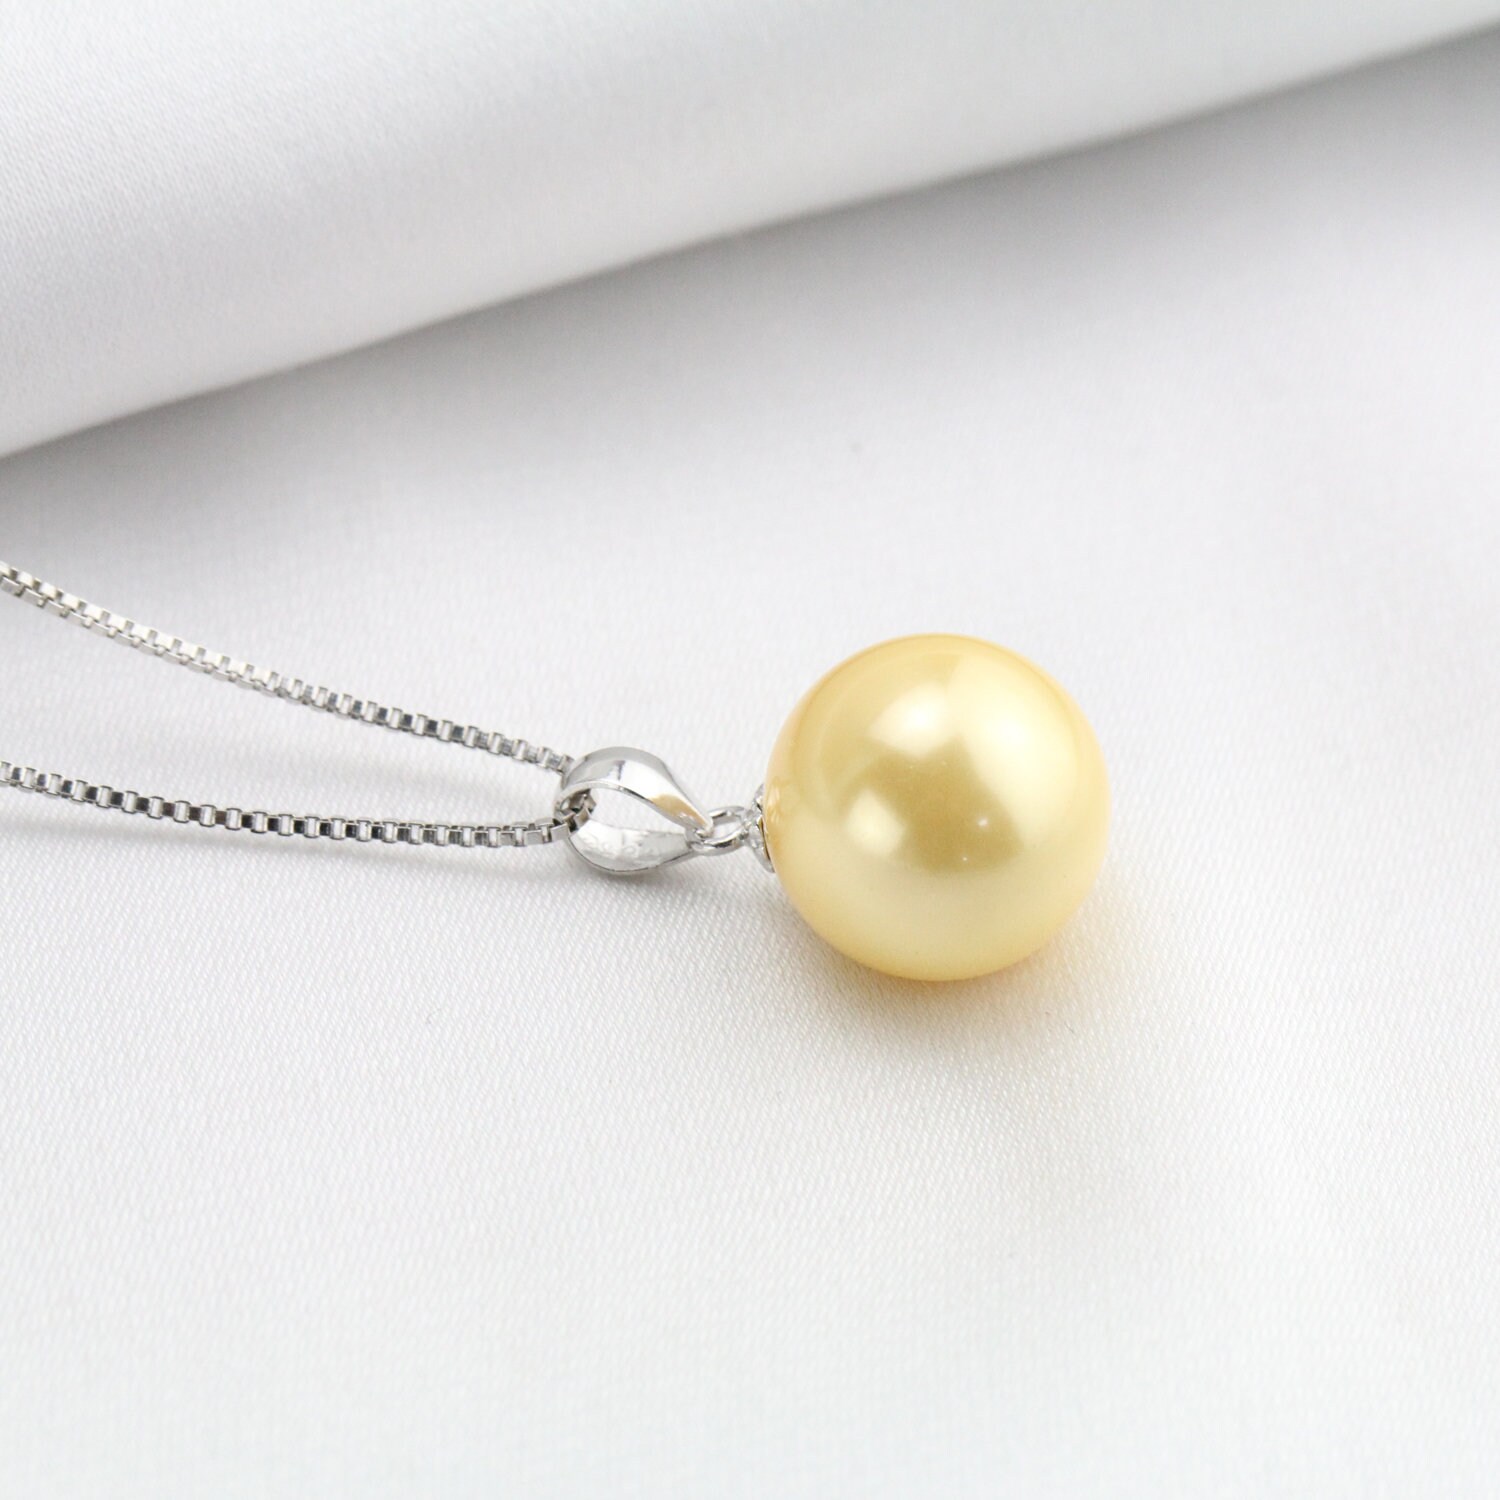 12mm Golden Color Round Pearl Pendant Necklacebridesmaid | Etsy